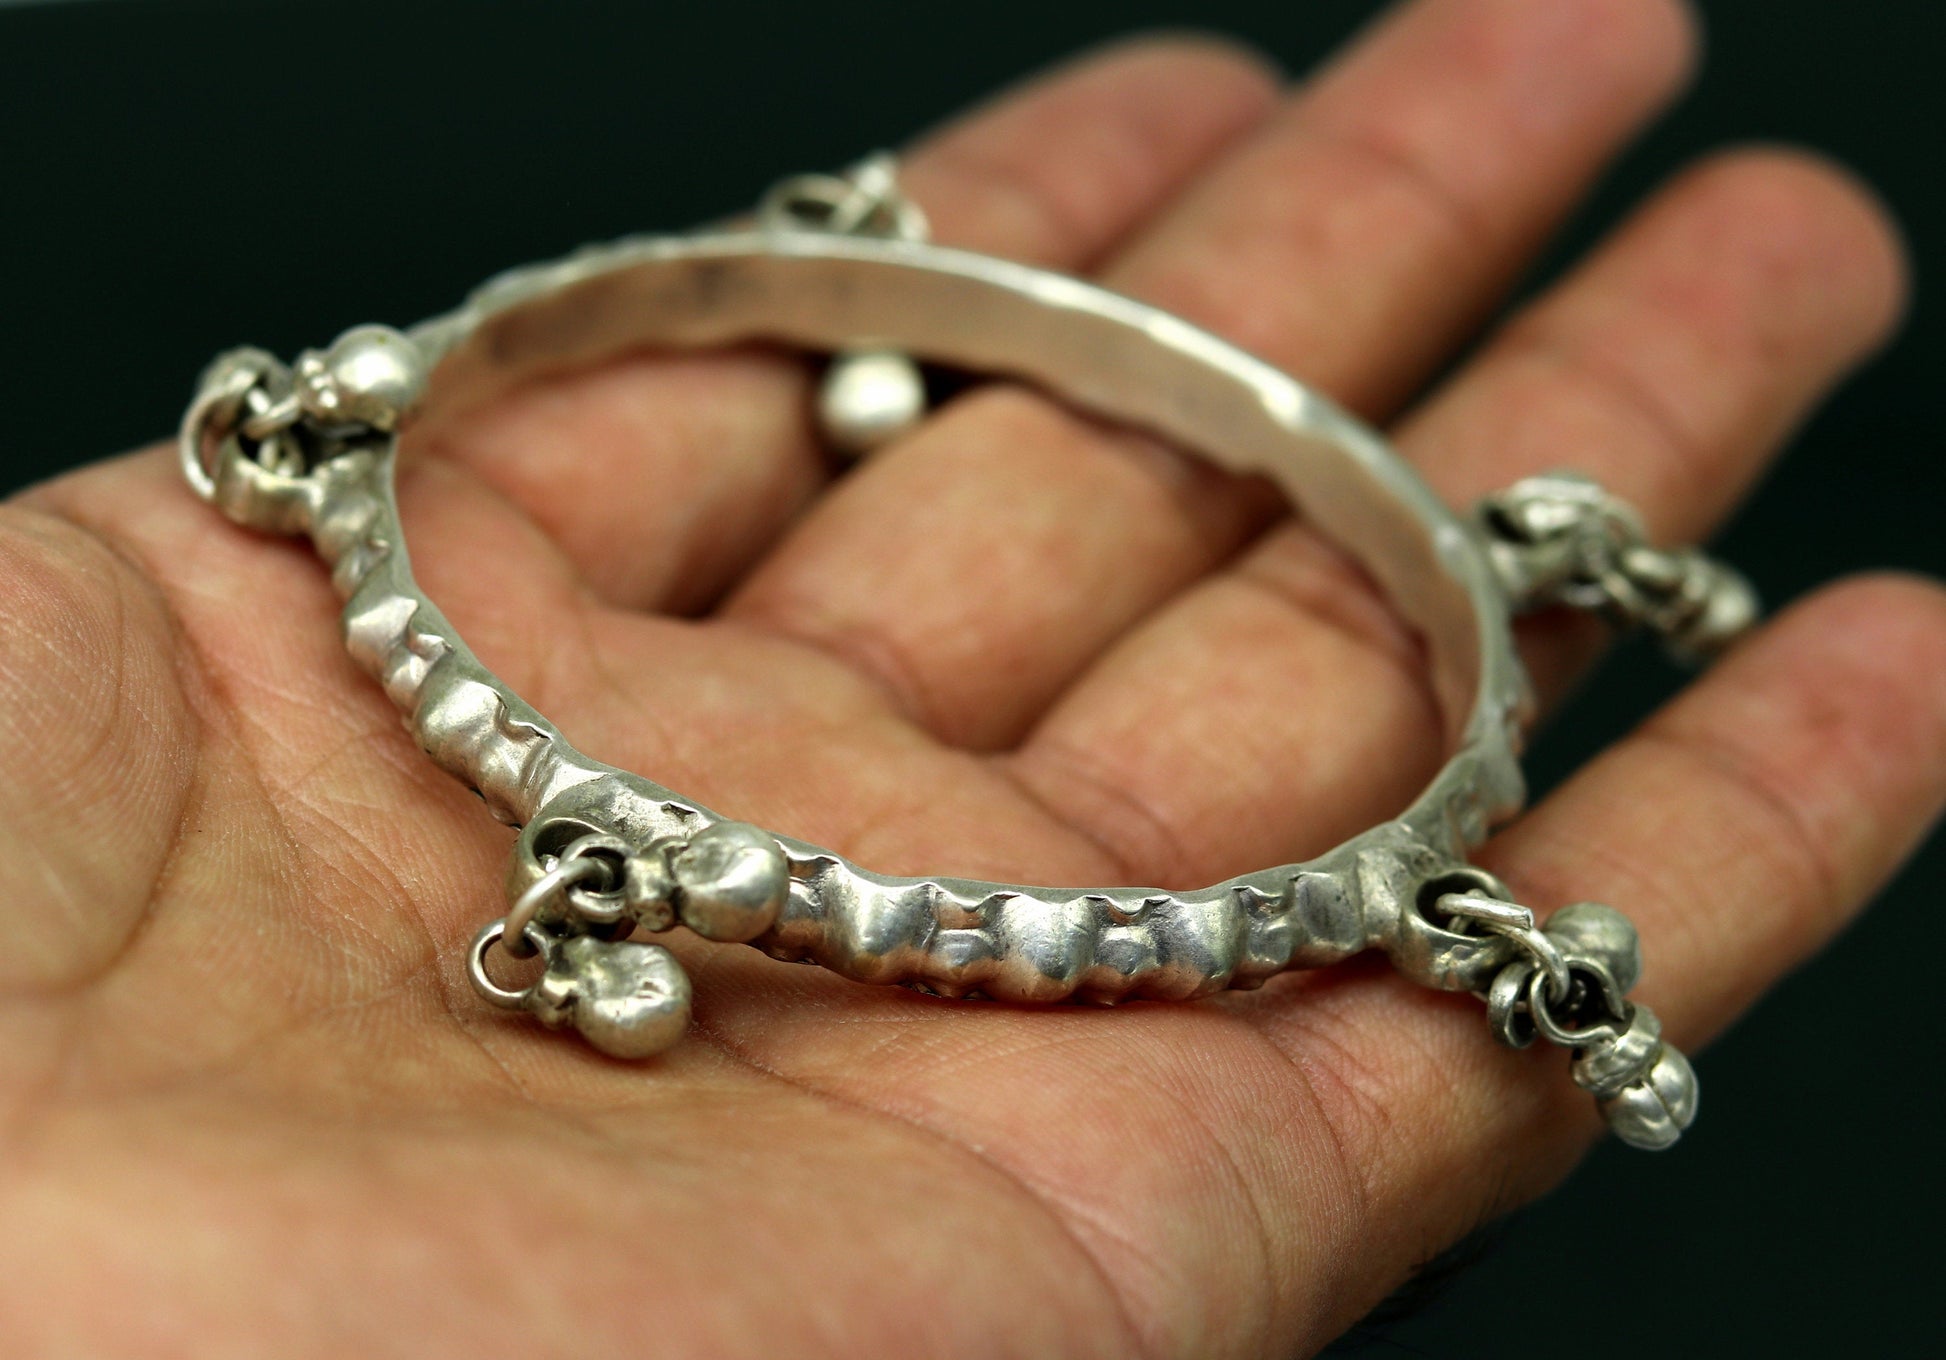 Genuine Vintage antique handmade solid silver old used charm bangle bracelet with jingle bells tribal customized belly dance jewelry sba20 - TRIBAL ORNAMENTS